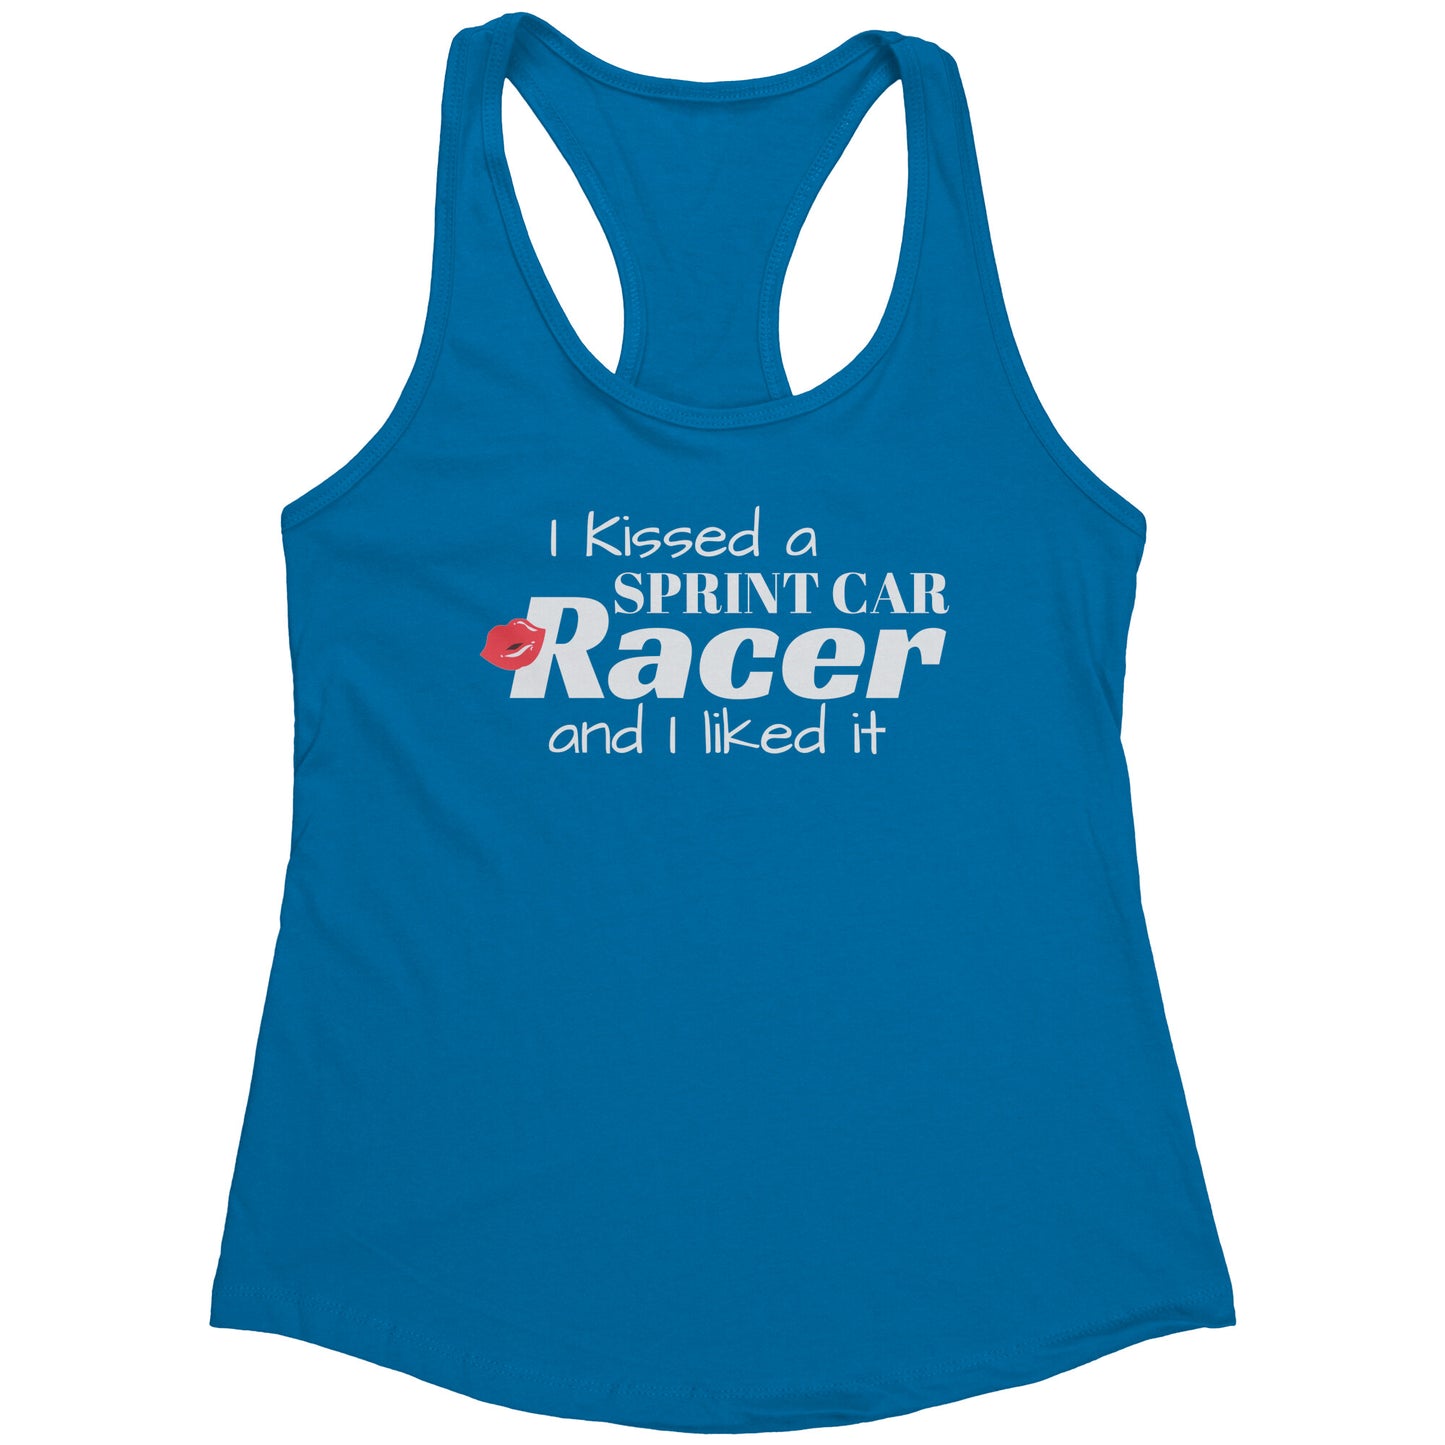 I KISSED A SPRINT CAR RACER AND I LIKED IT WOMEN TANK TOP